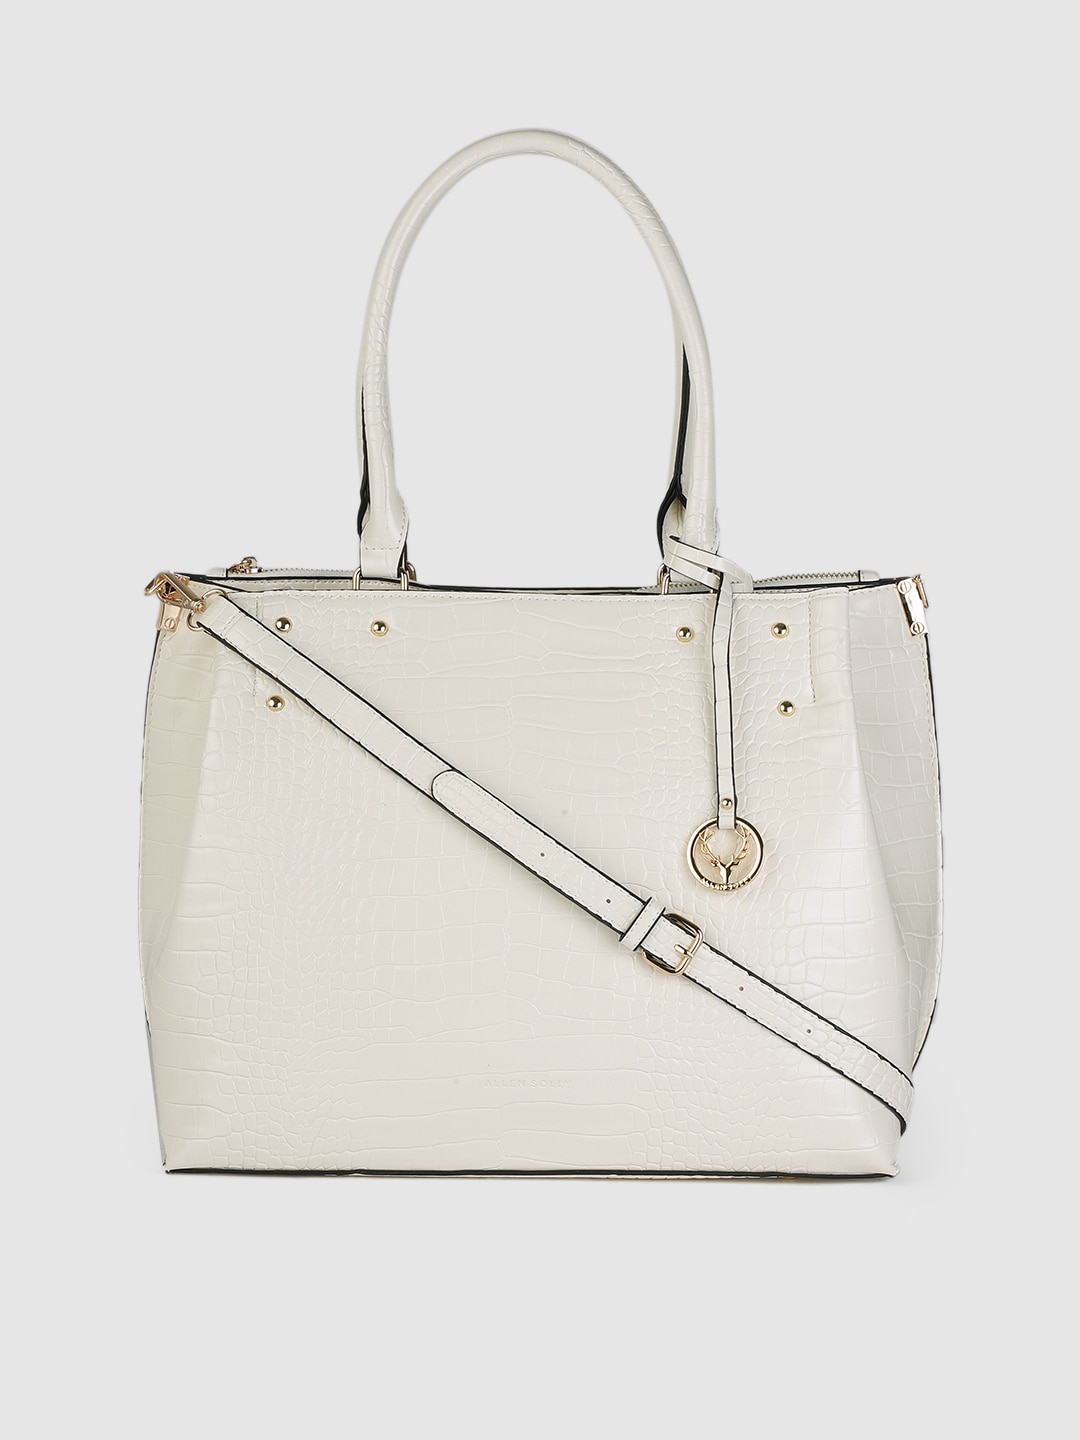 Allen Solly Women White Animal Textured PU Oversized Structured Shoulder  Bag Price in India, Full Specifications & Offers 